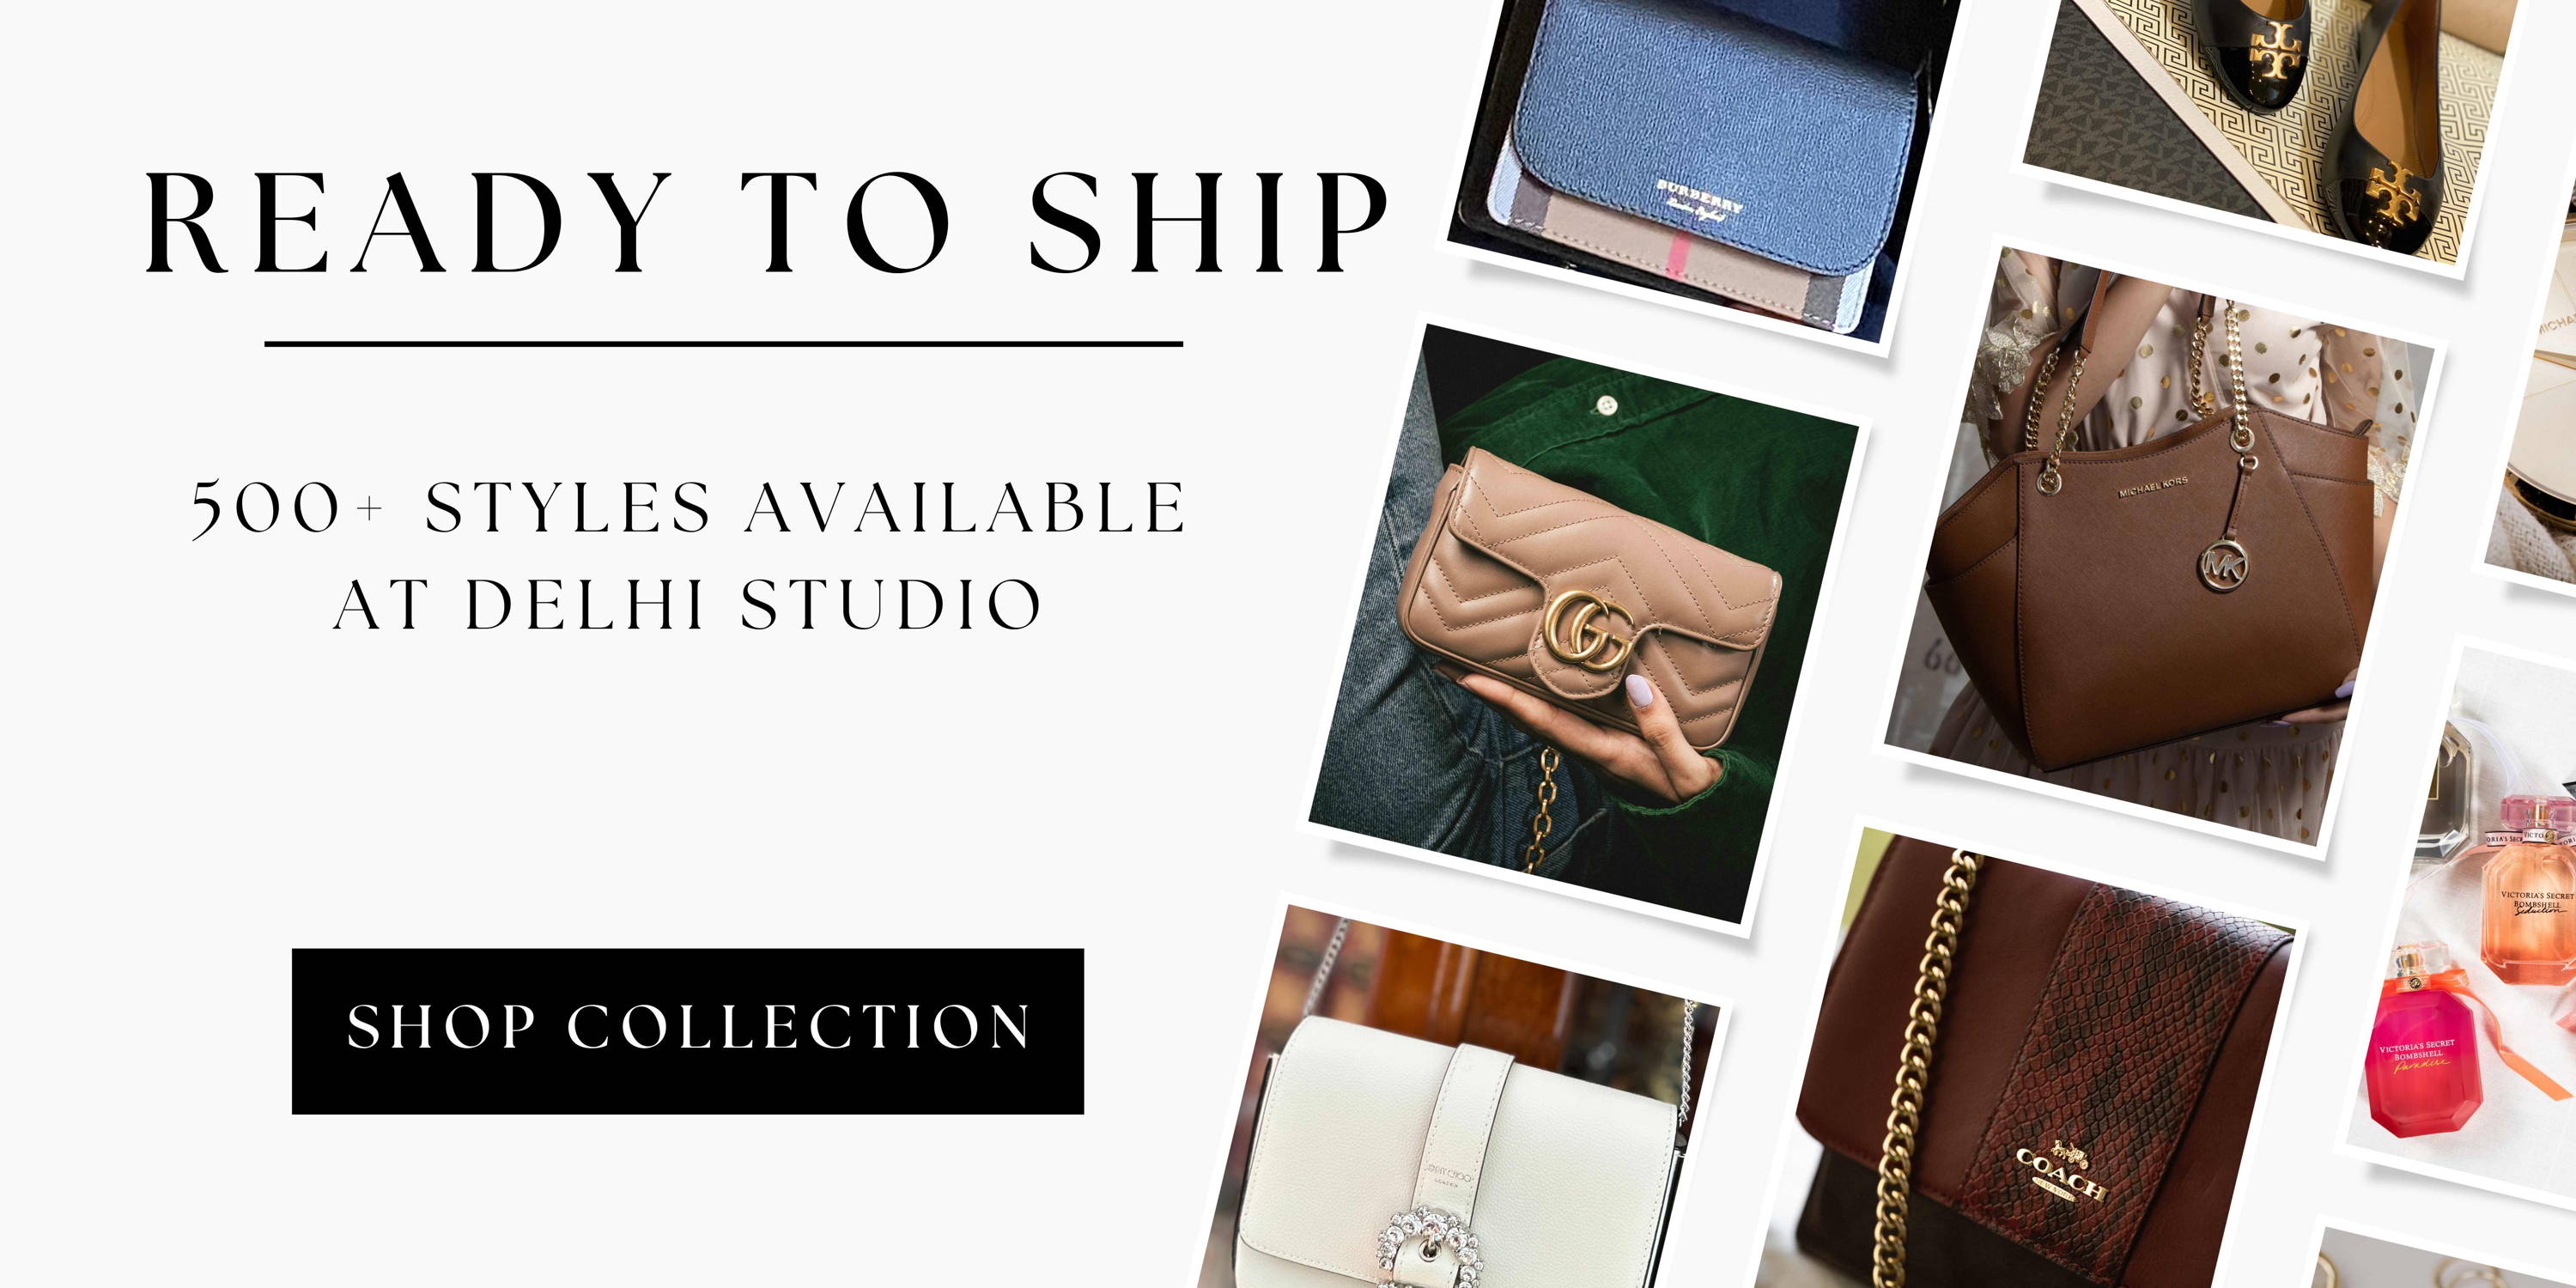 Check Out Our Ready To Ship Collection